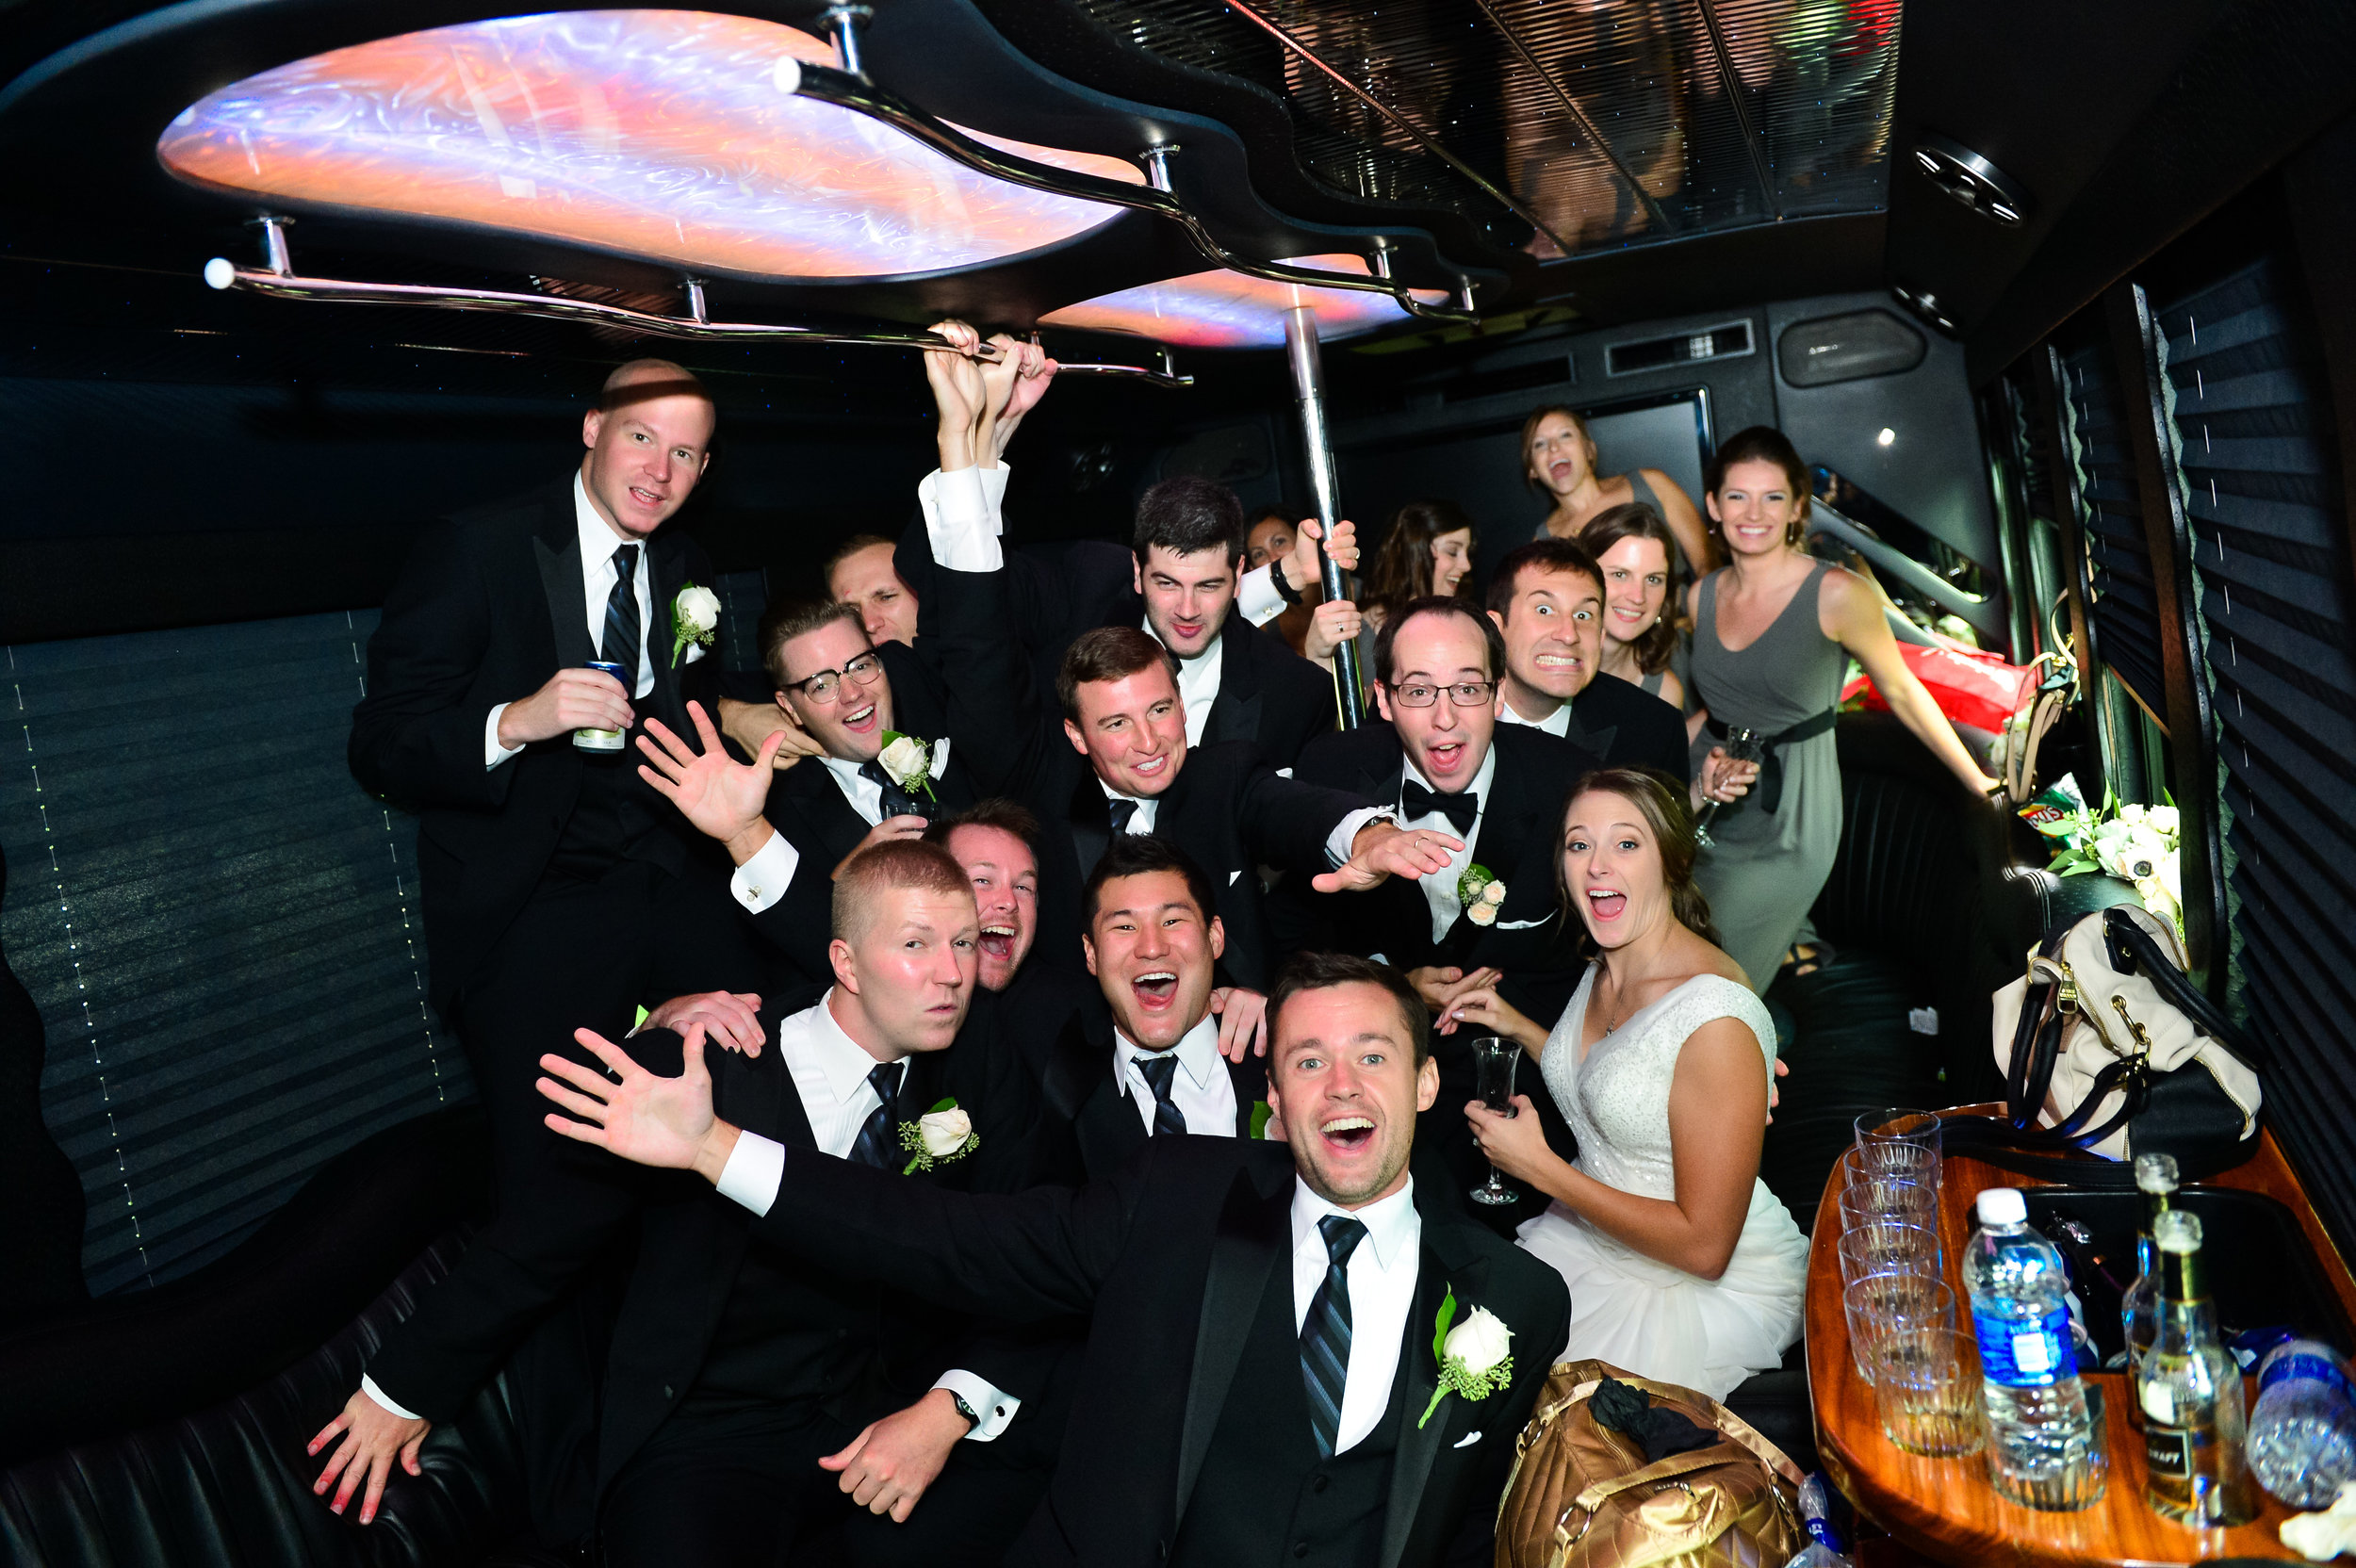 Wedding Party on party bus for their wedding reception. 